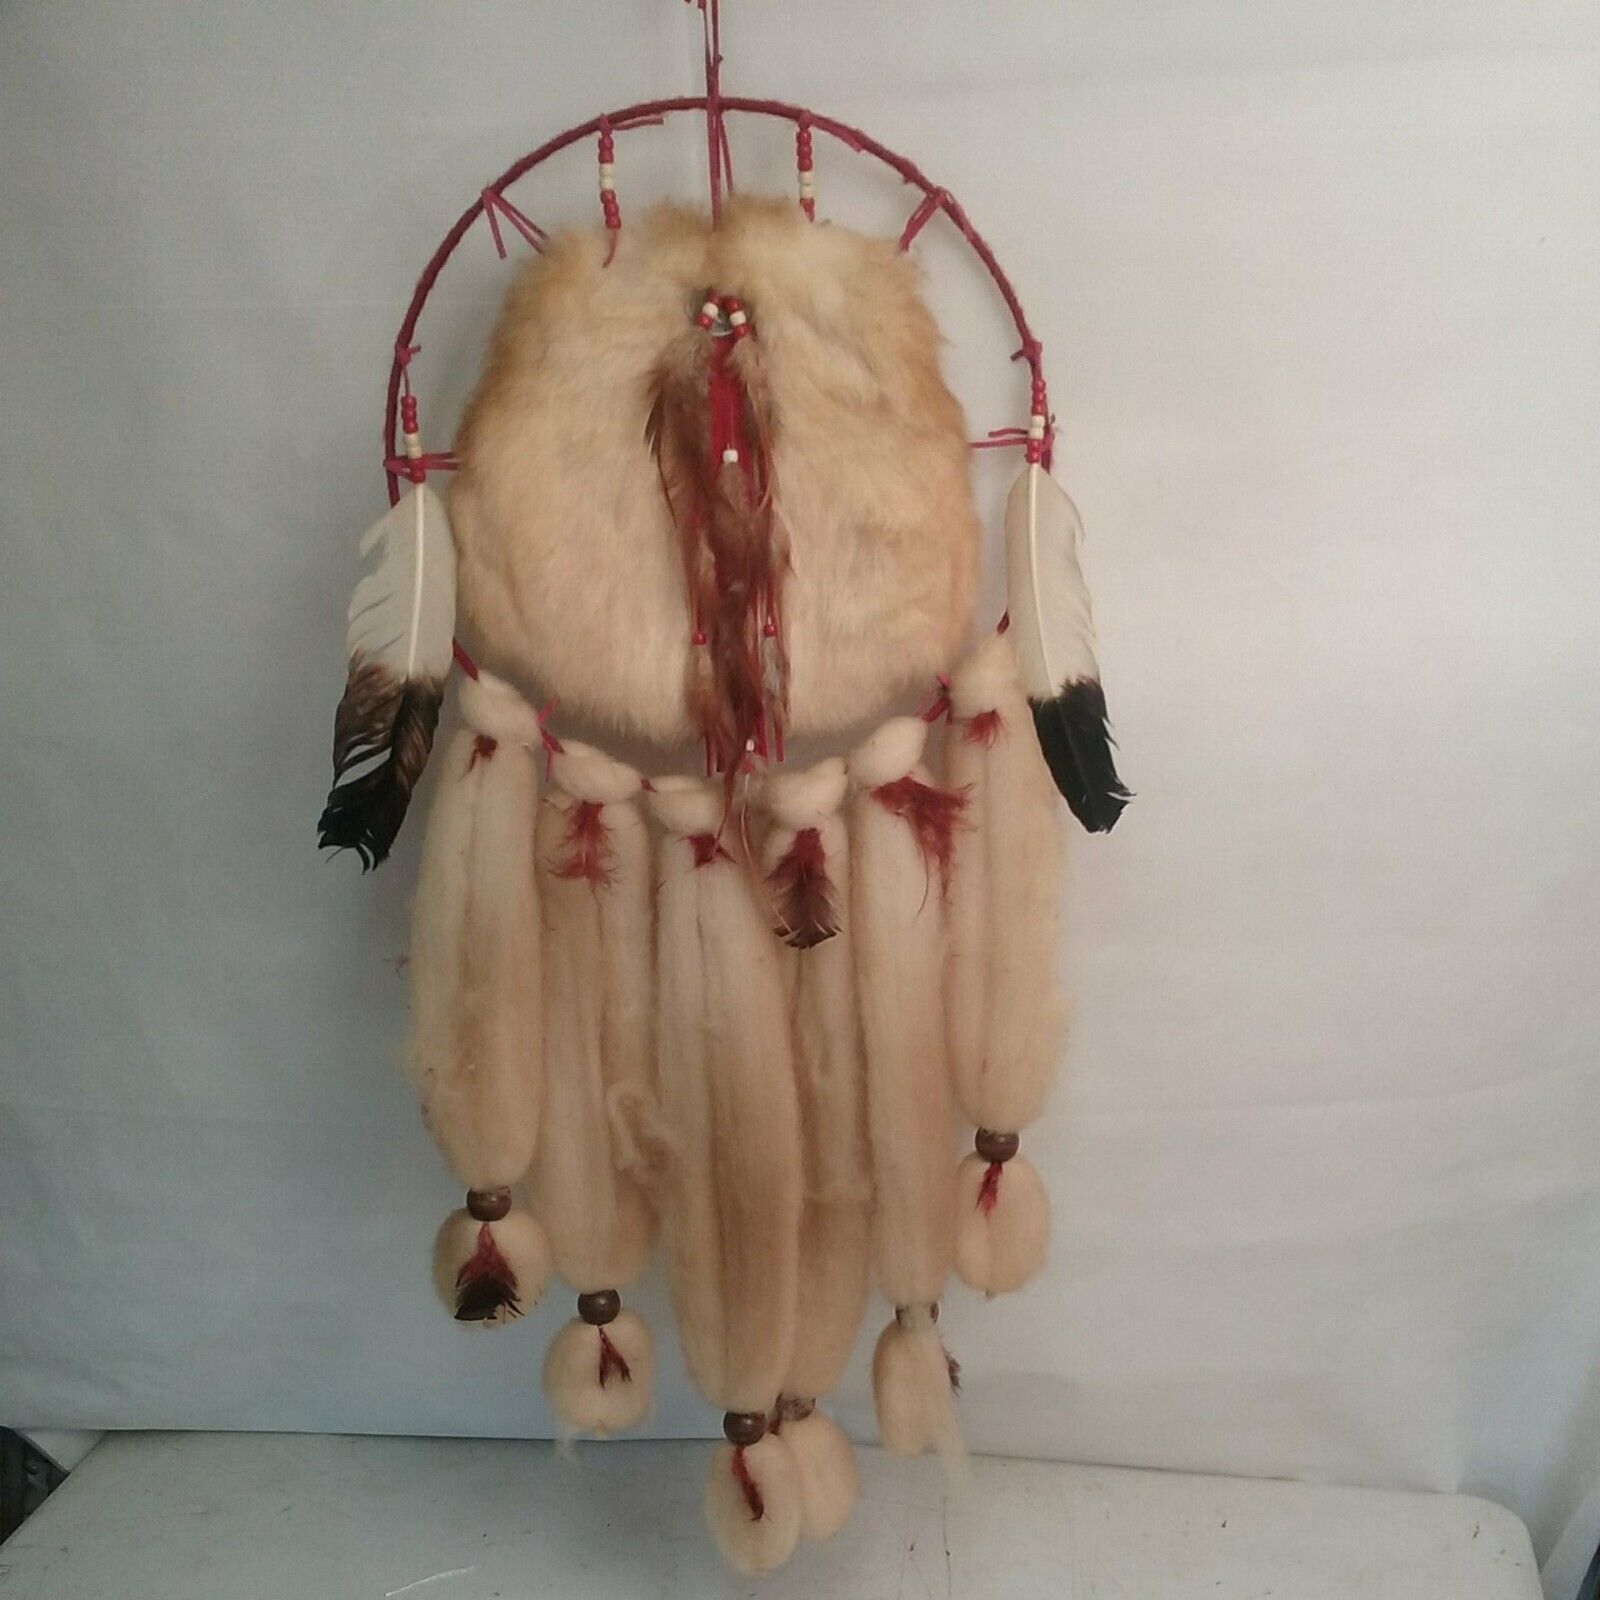 Vintage Dream Catcher Fur/Wool/Feathers/Beads 34in x 18in